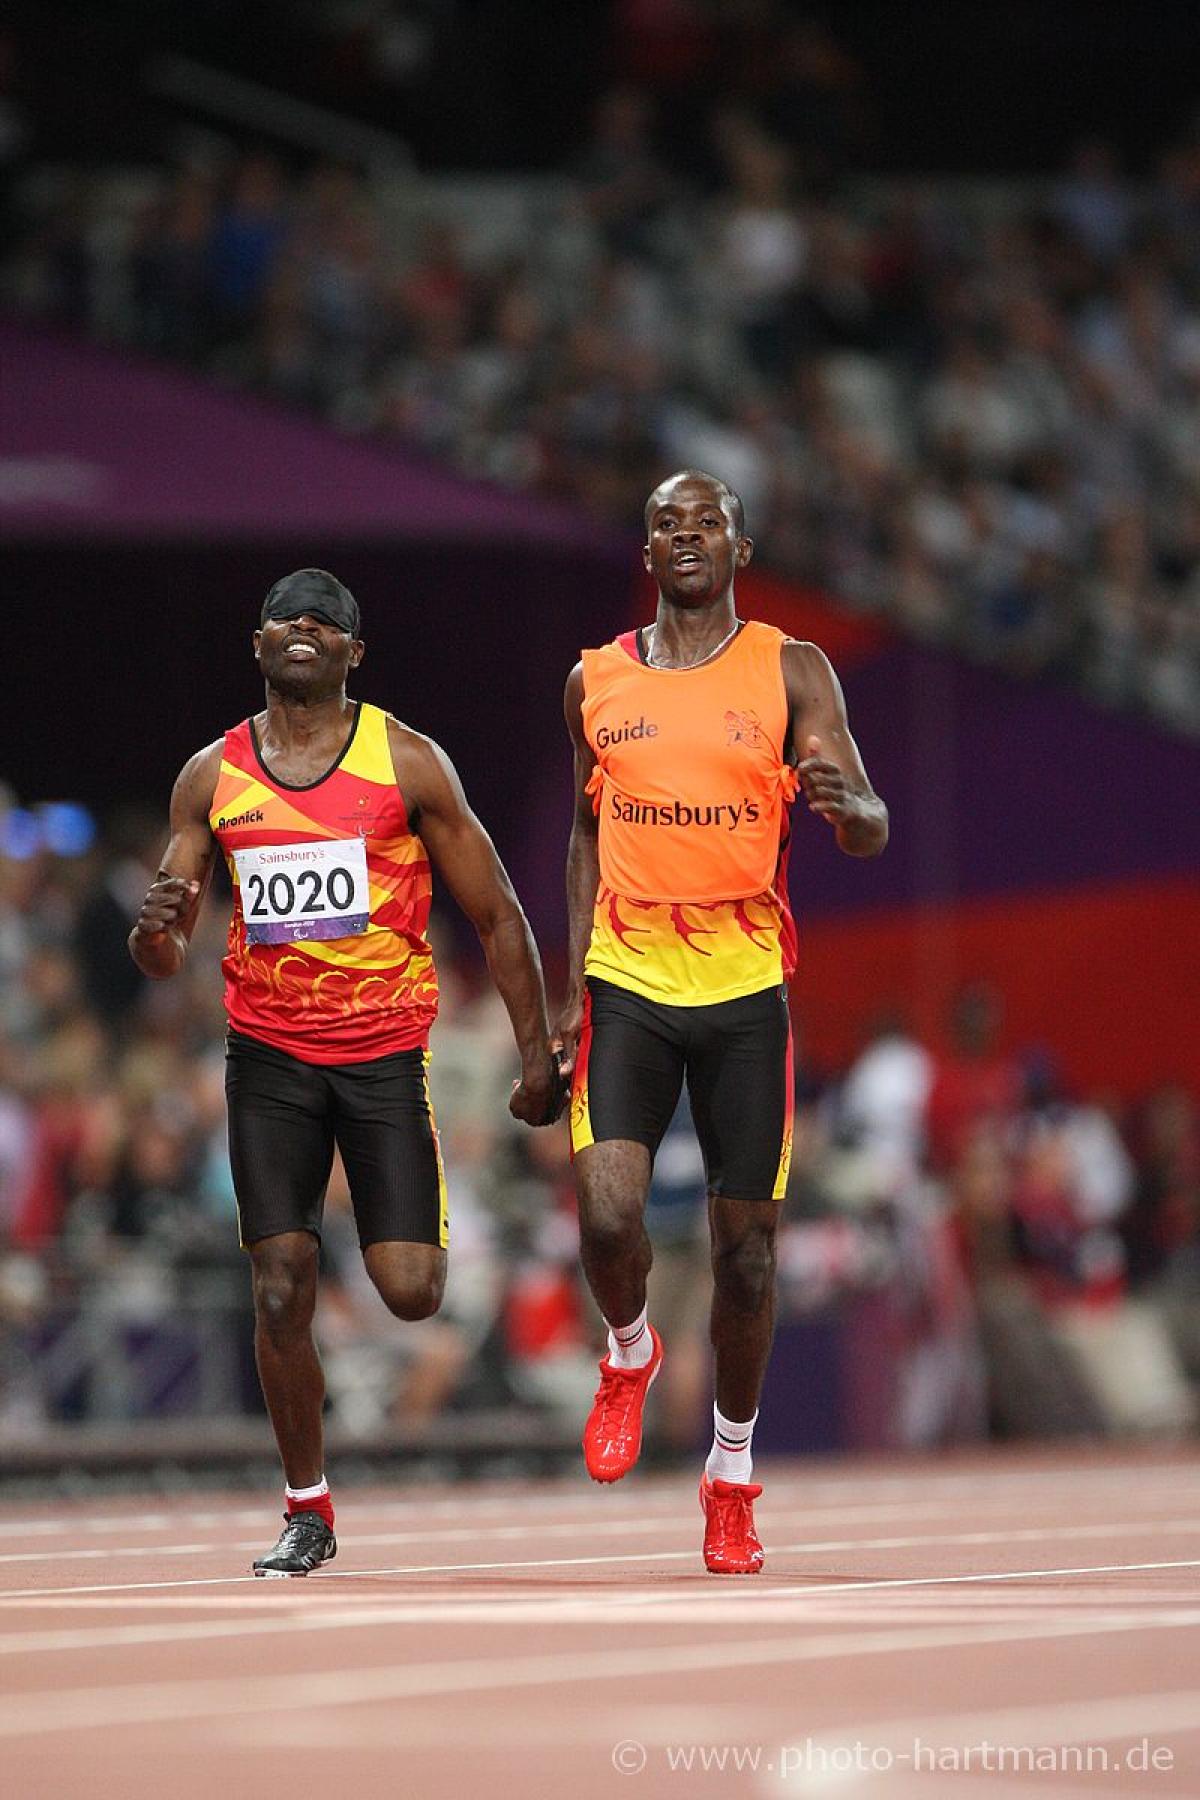 Jose Sayovo ARMANDO of Angola in the Men's 200m - T11 at the London 2012 Paralympic Games.